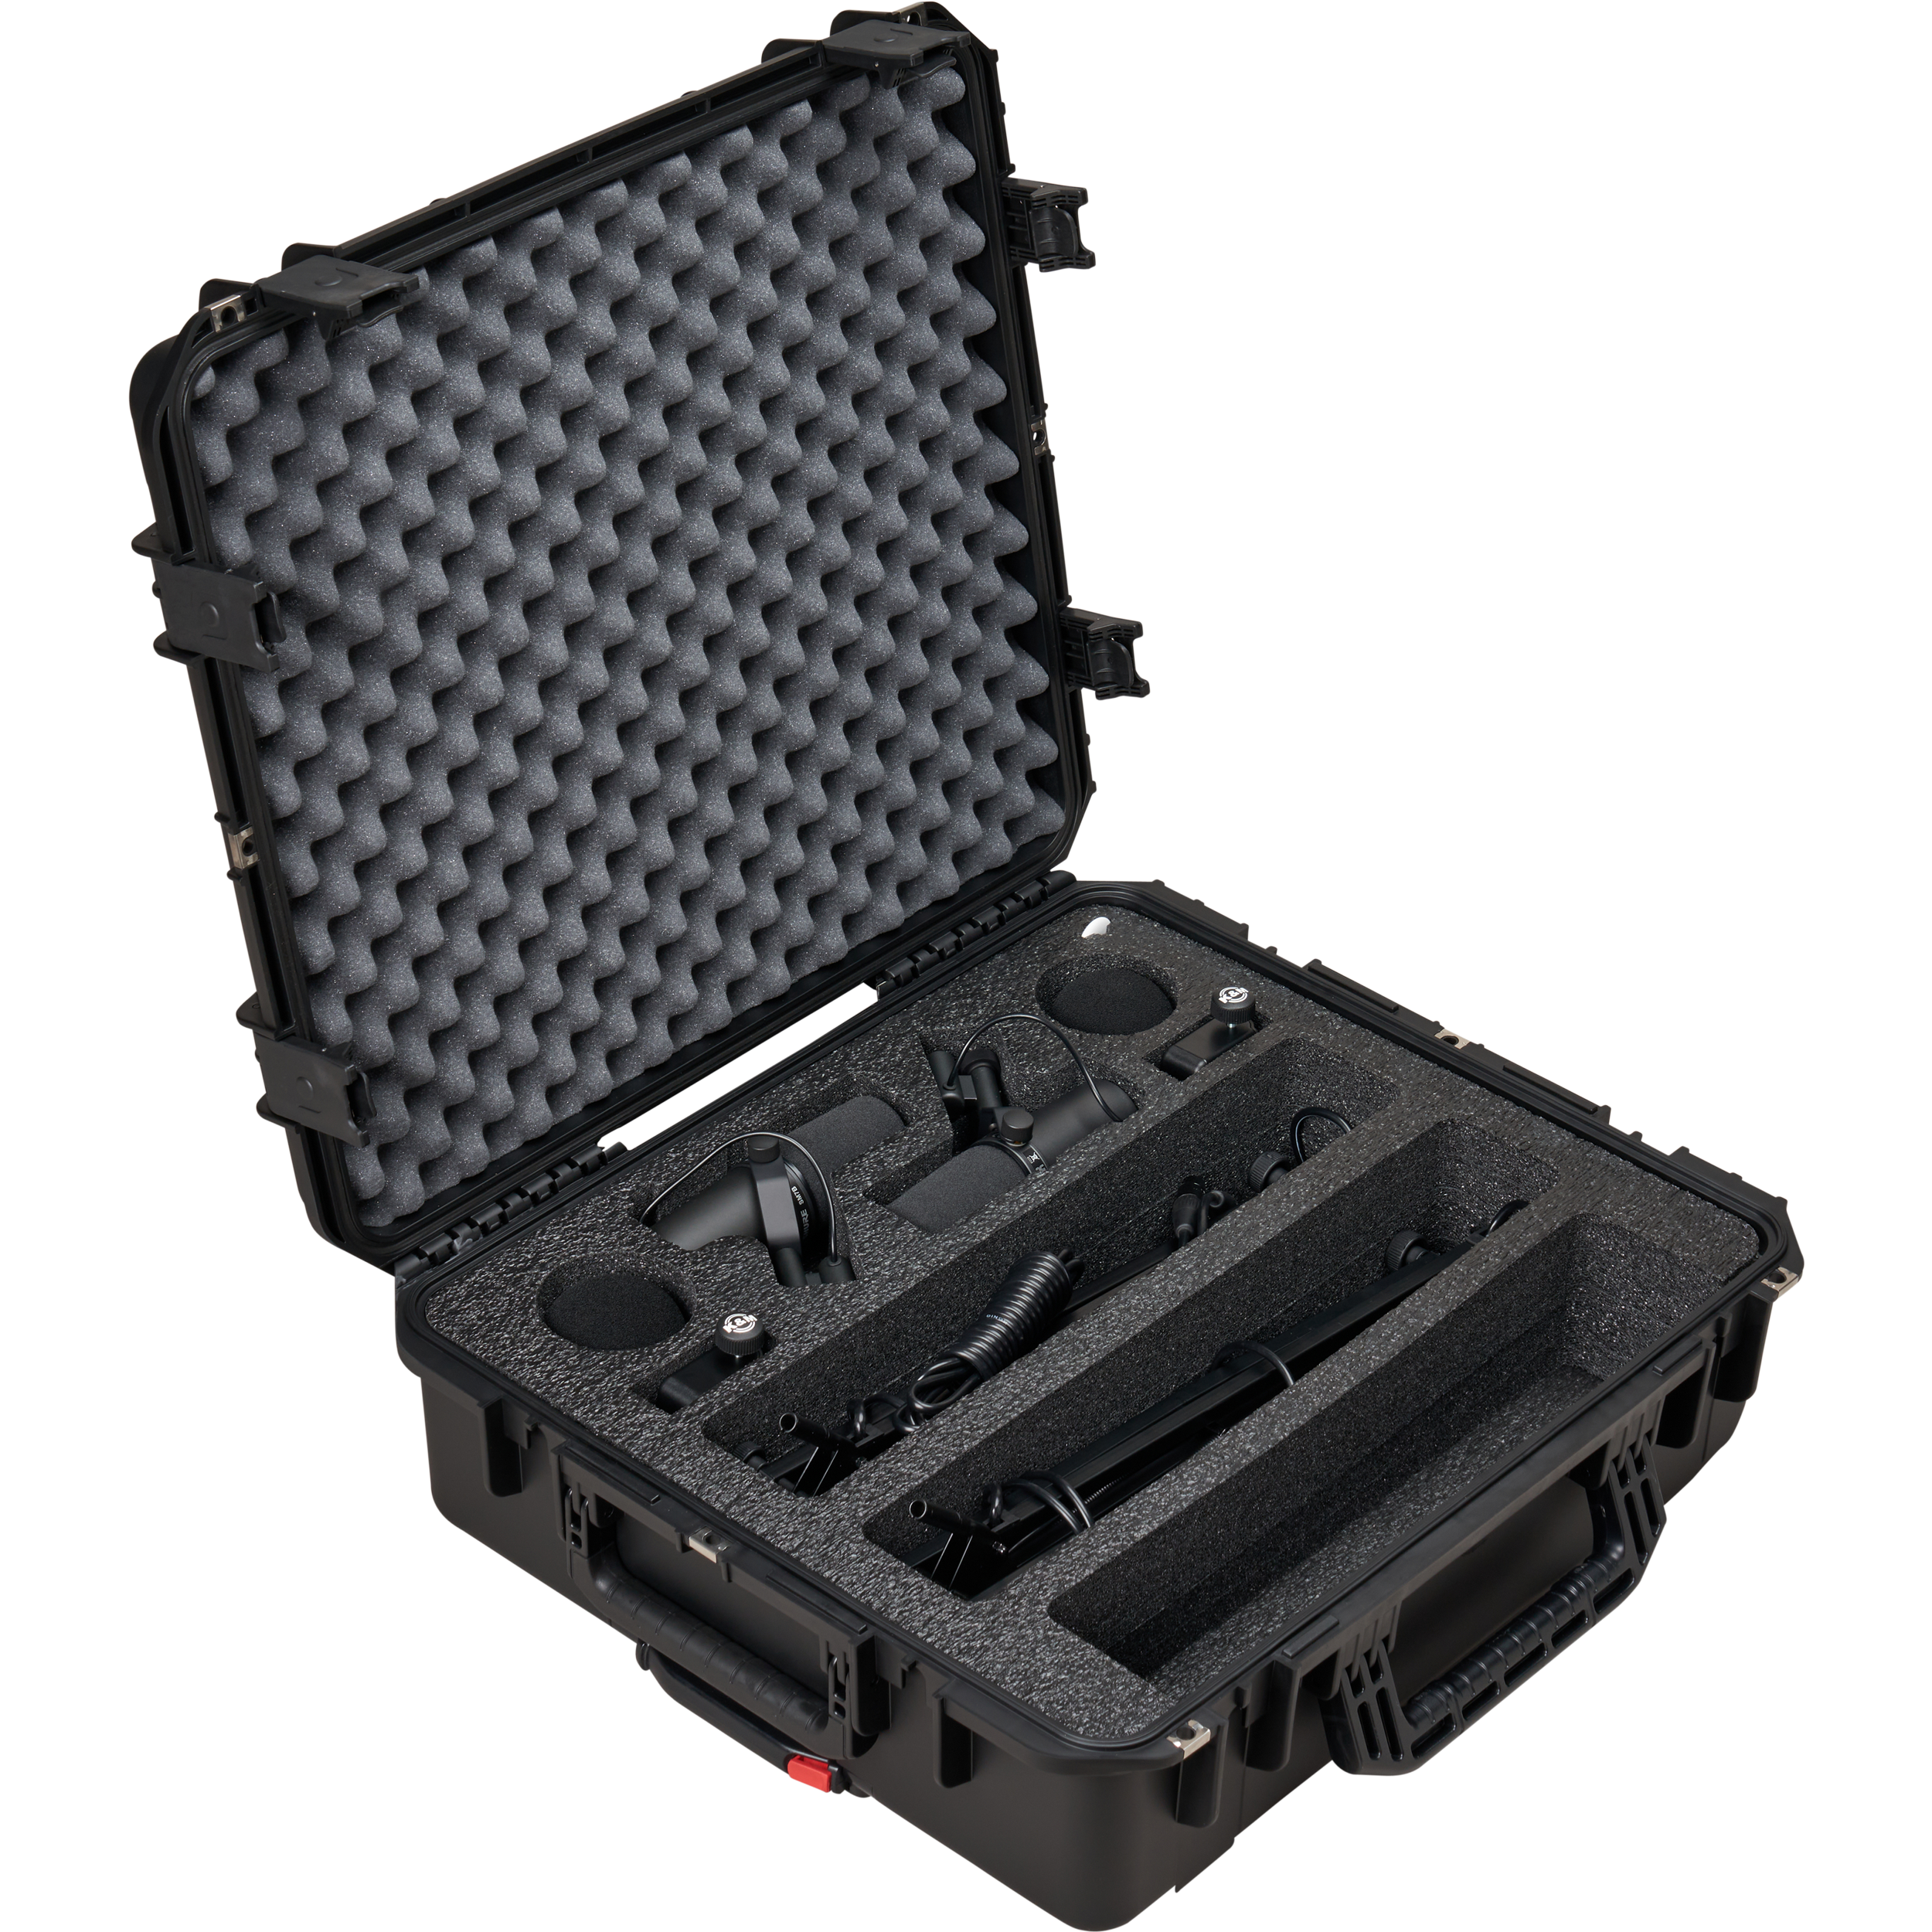 BYFP ipCase for Shure SM7B Dual Broadcast Pack